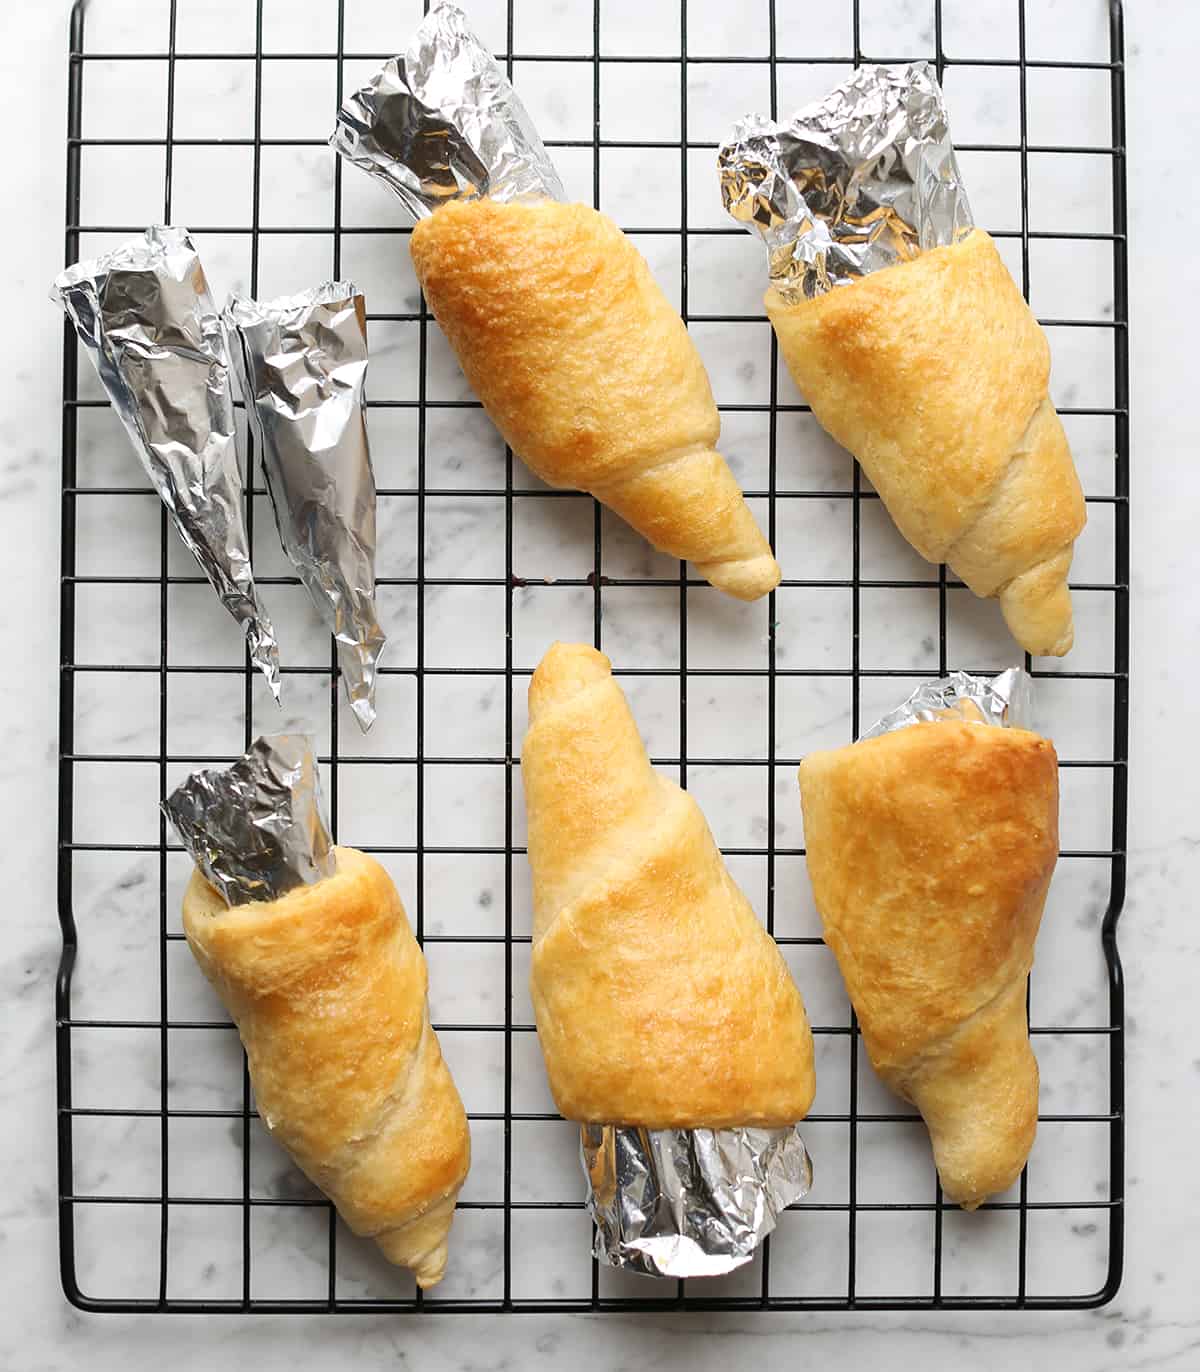 carrot-shaped pastries with foil on wire rack